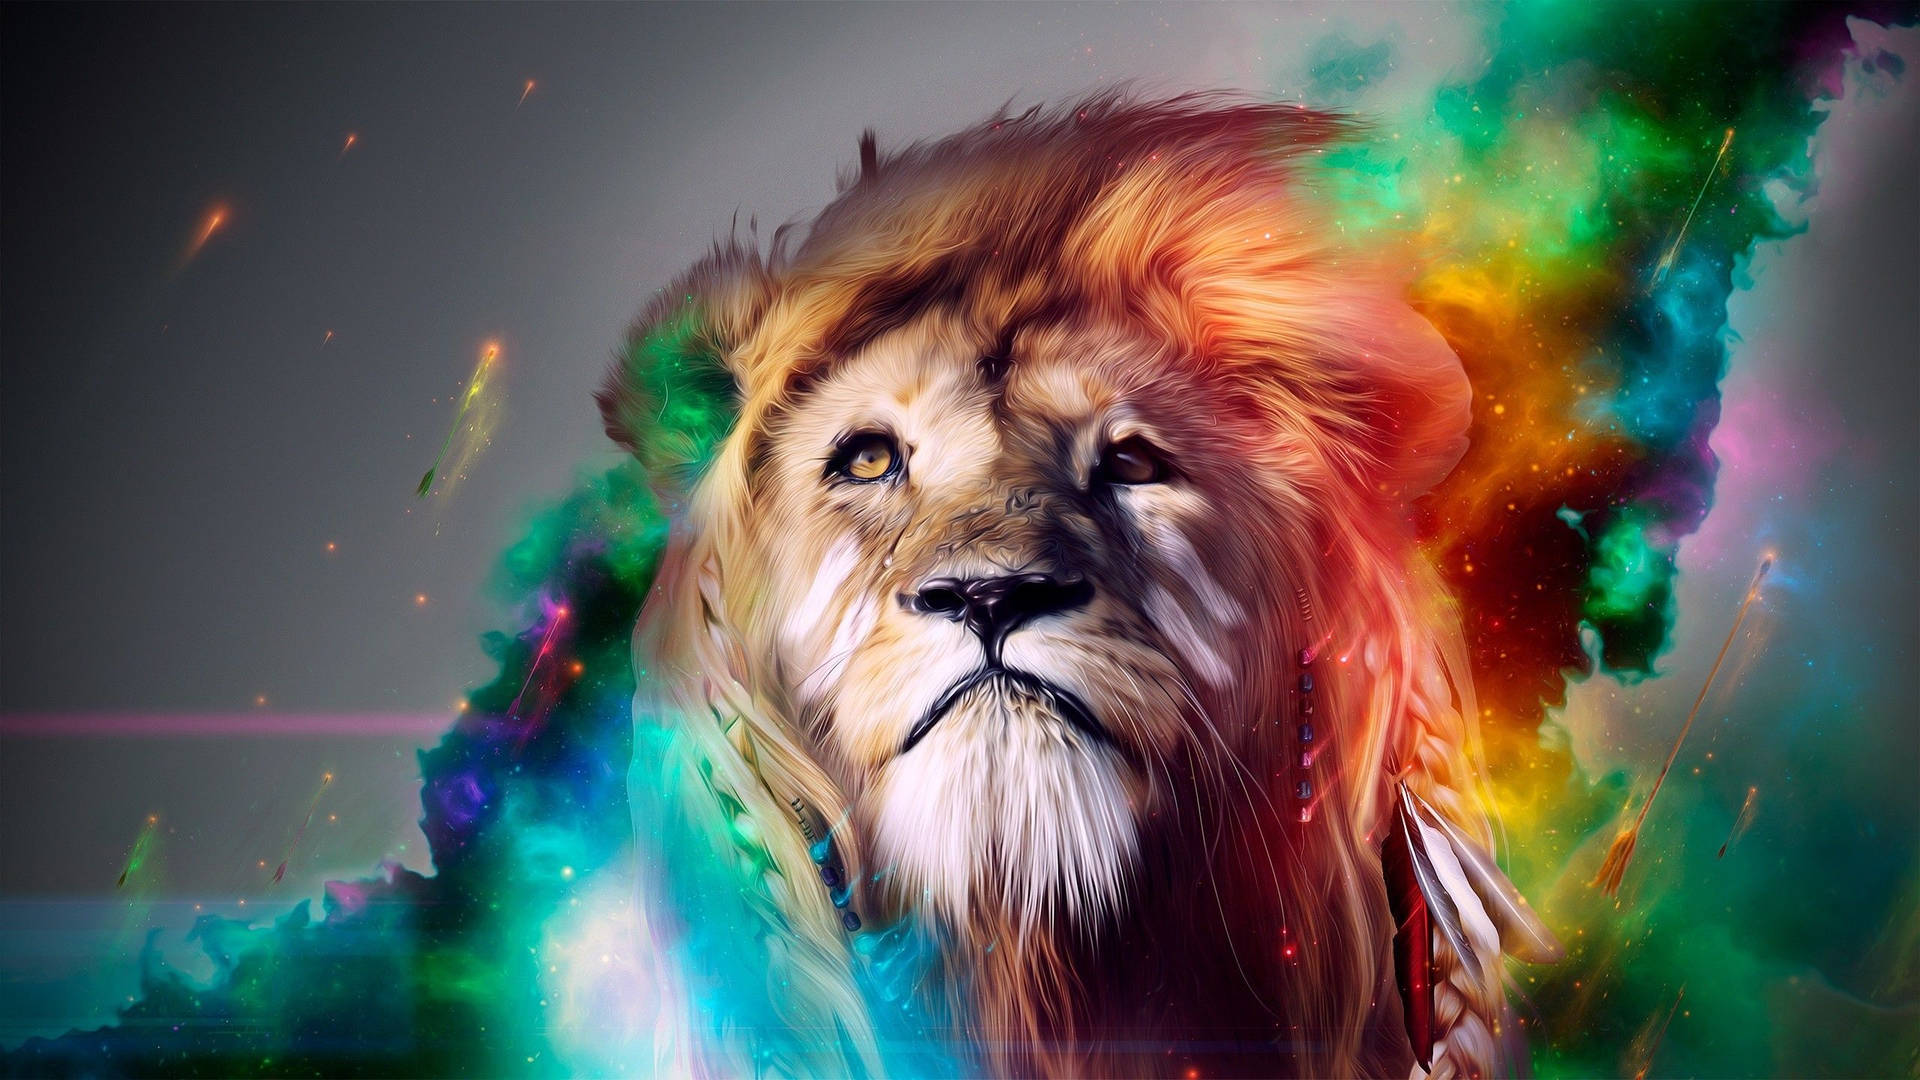 Cool Lion Many Colors Mane Background